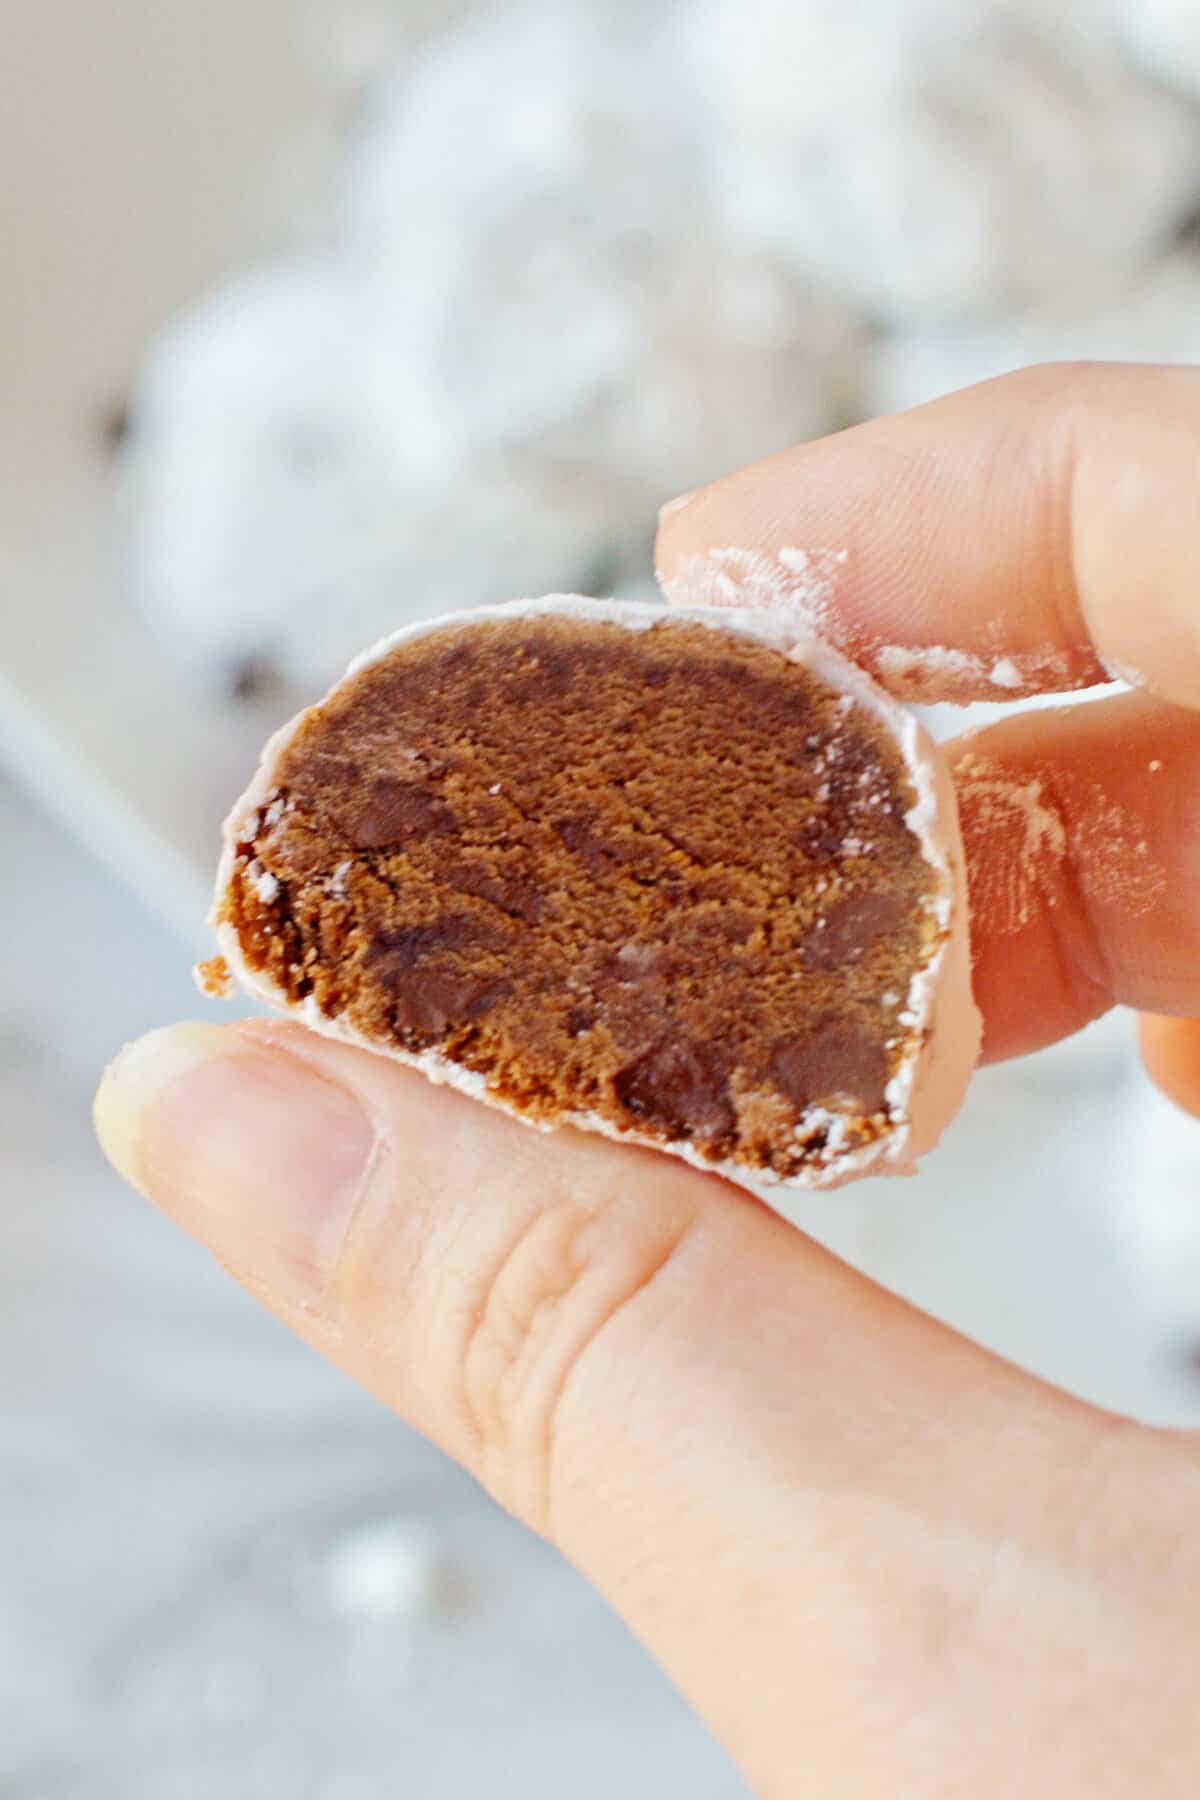 Woman's hand holding a chocolate snowball cookie with mini chocolate chips.